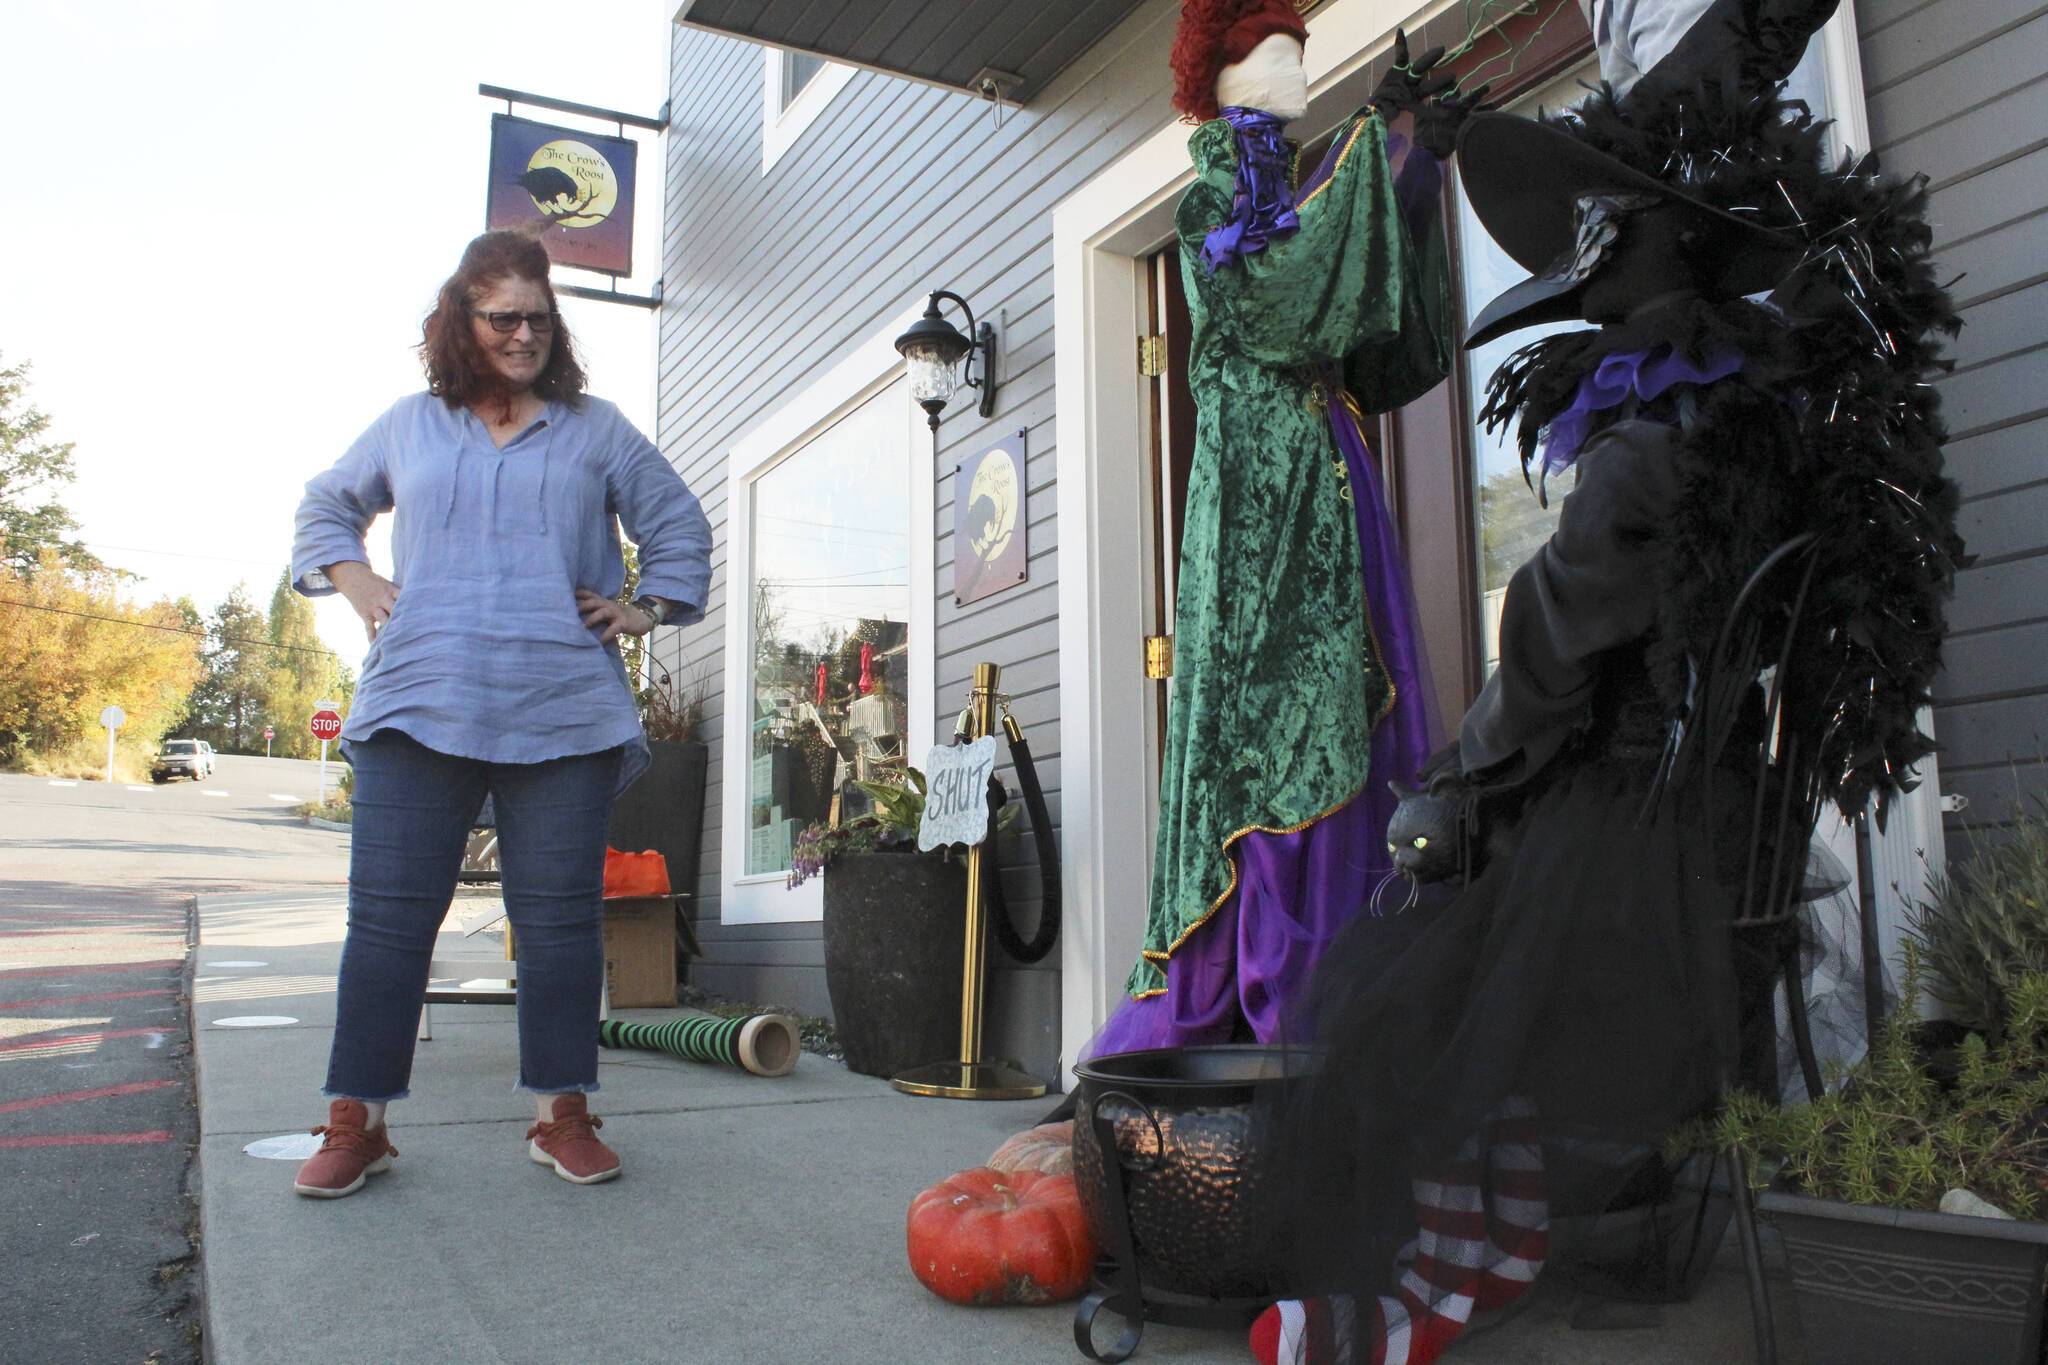 Photo by Karina Andrew/Whidbey News-Times
Mel Rodman sets up a “Hocus Pocus” themed display outside her business, Crow’s Roost. She is one of more than twenty business owners participating in this year’s Scarecrow Trail, part of the annual Haunting of Coupeville.